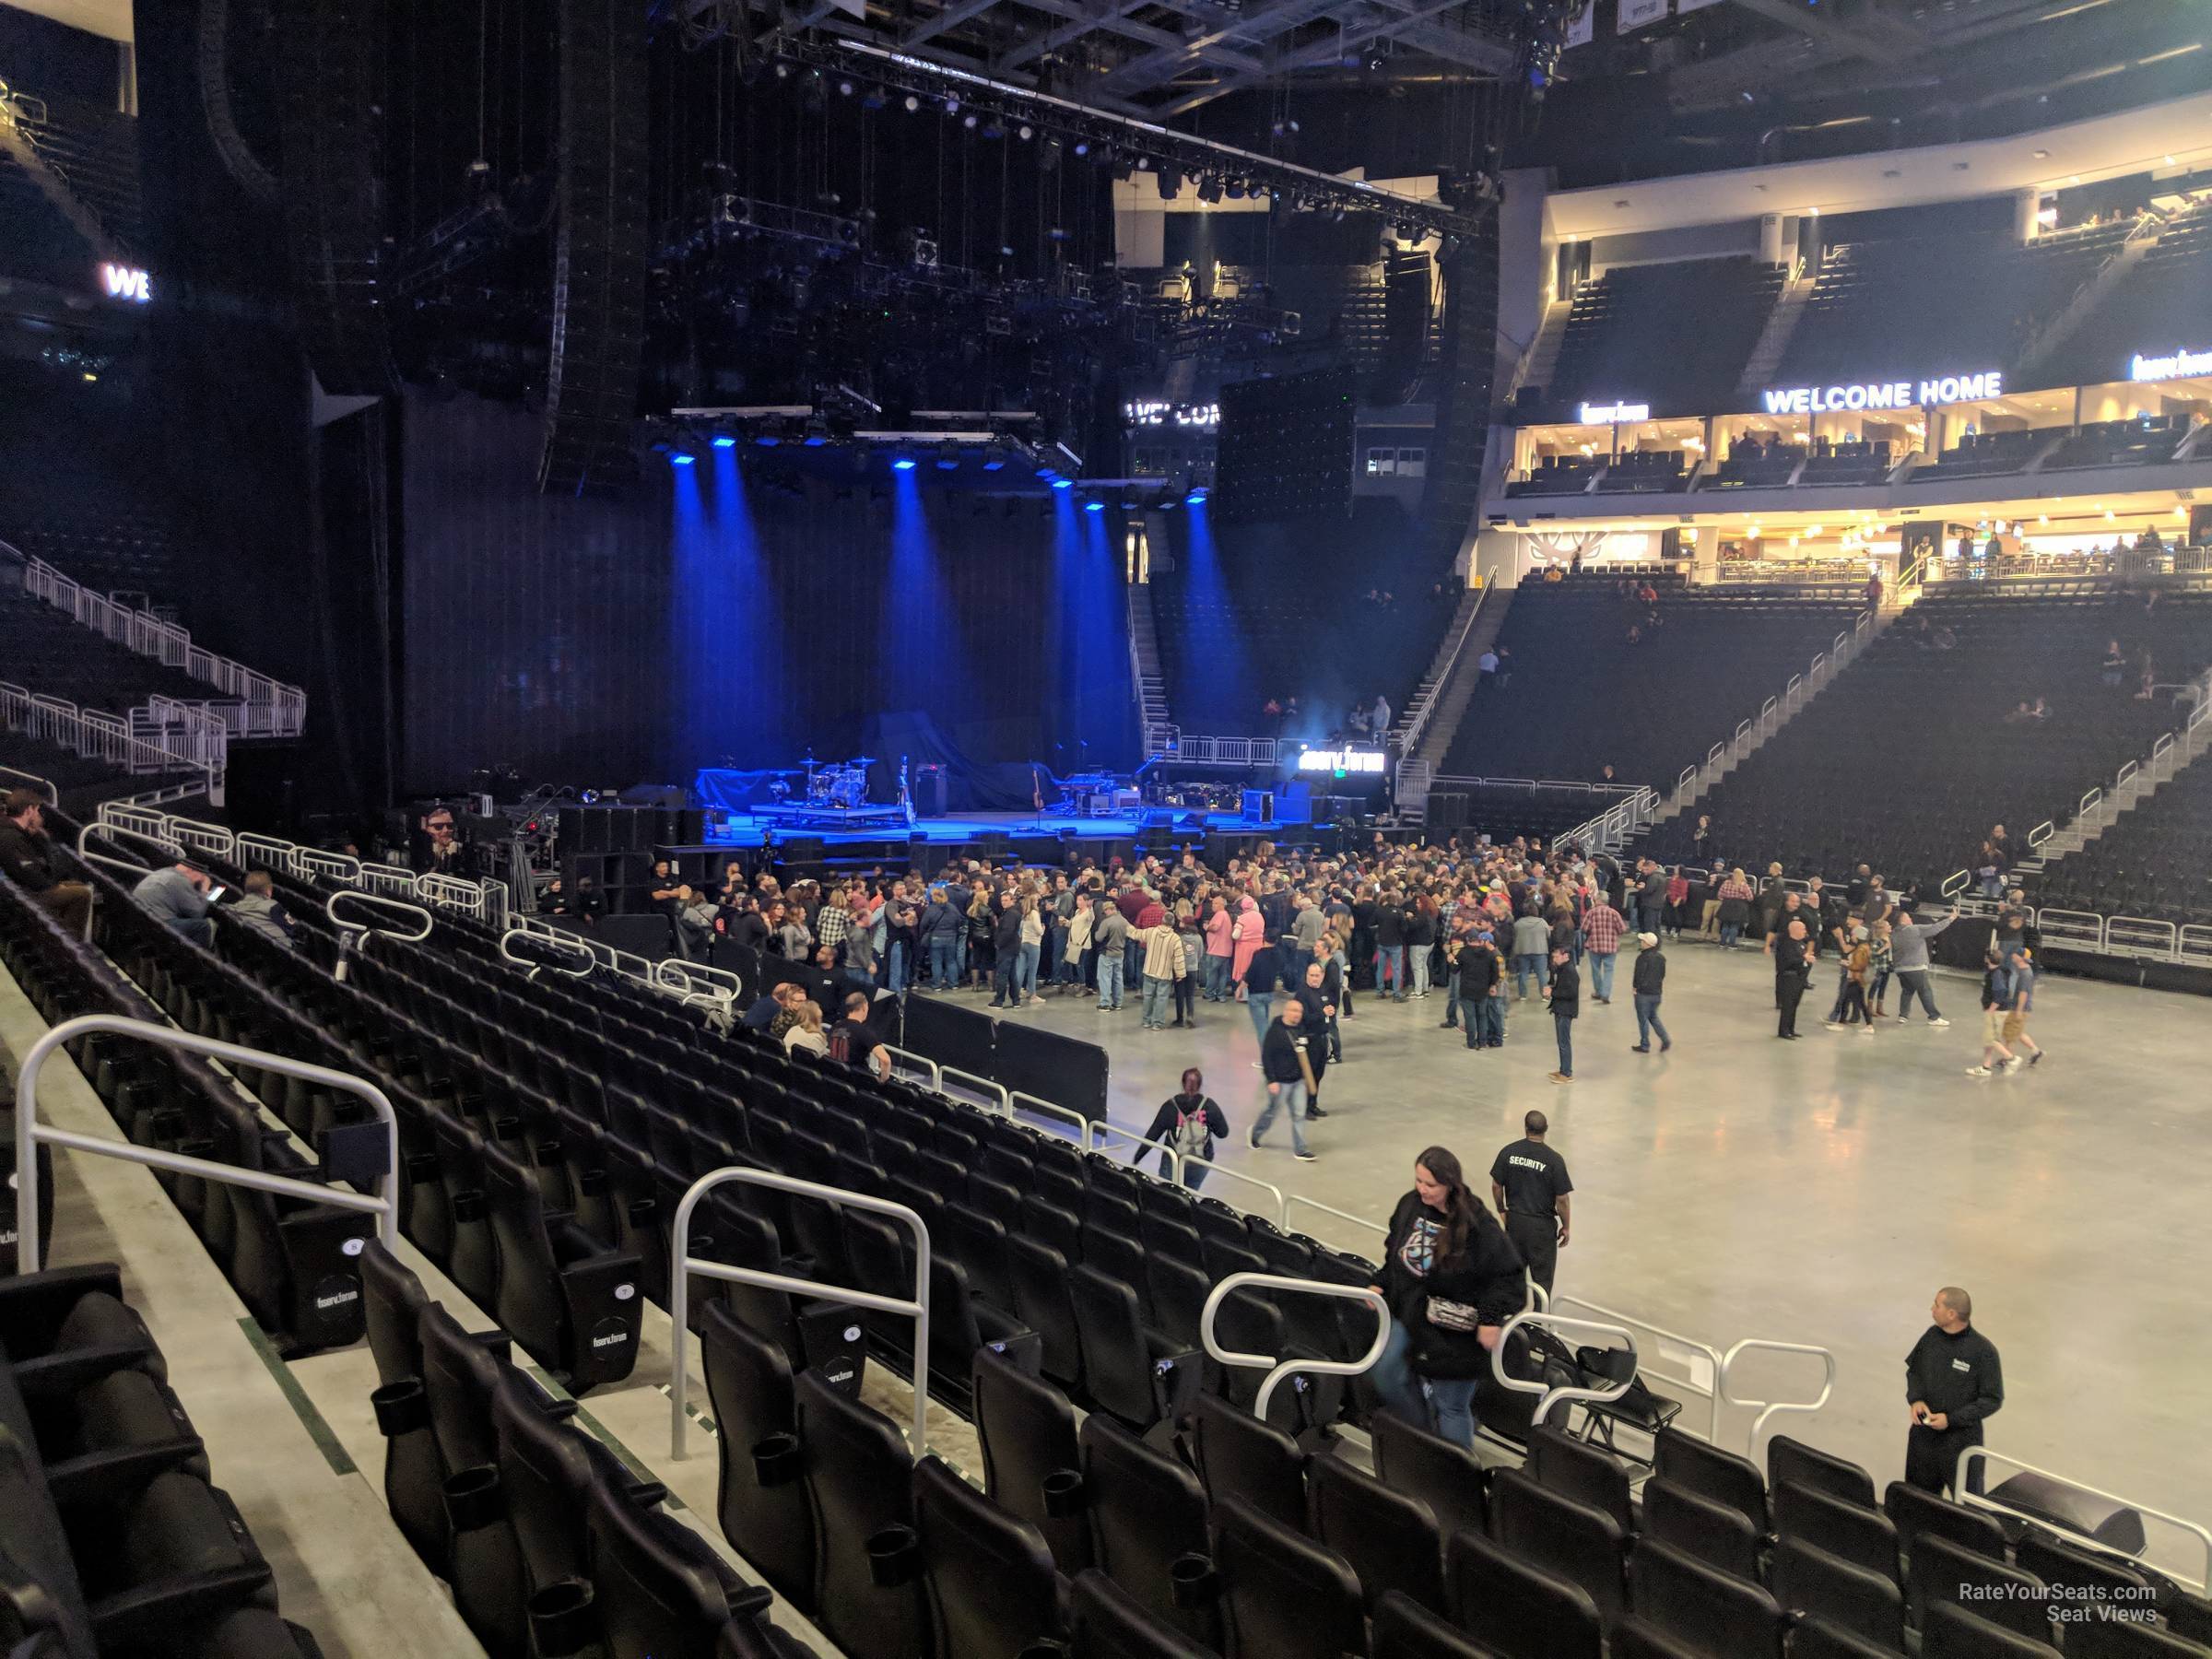 section 105, row 11 seat view  for concert - fiserv forum